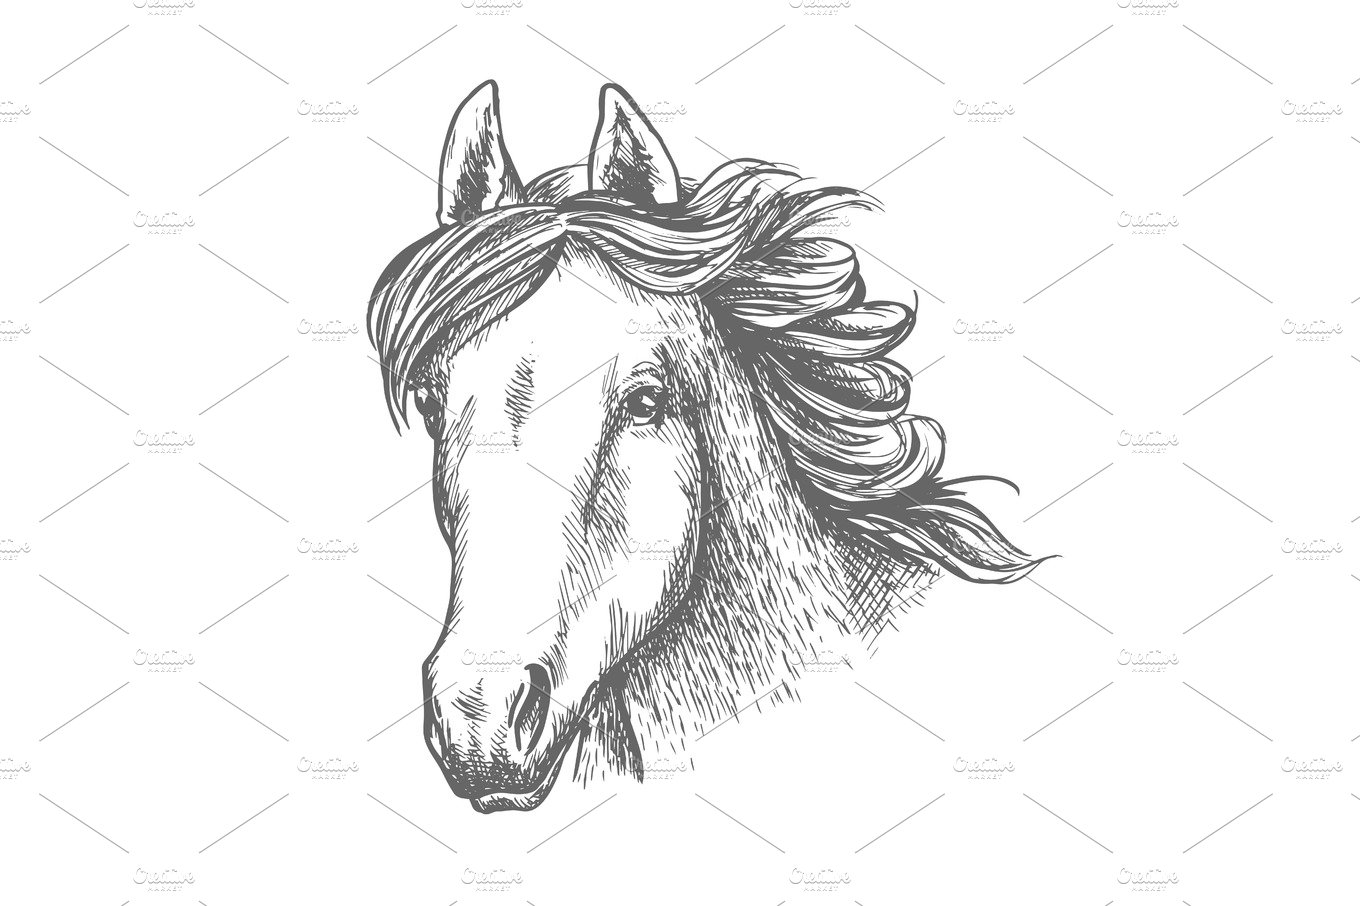 Horse head sketch of arabian mare cover image.